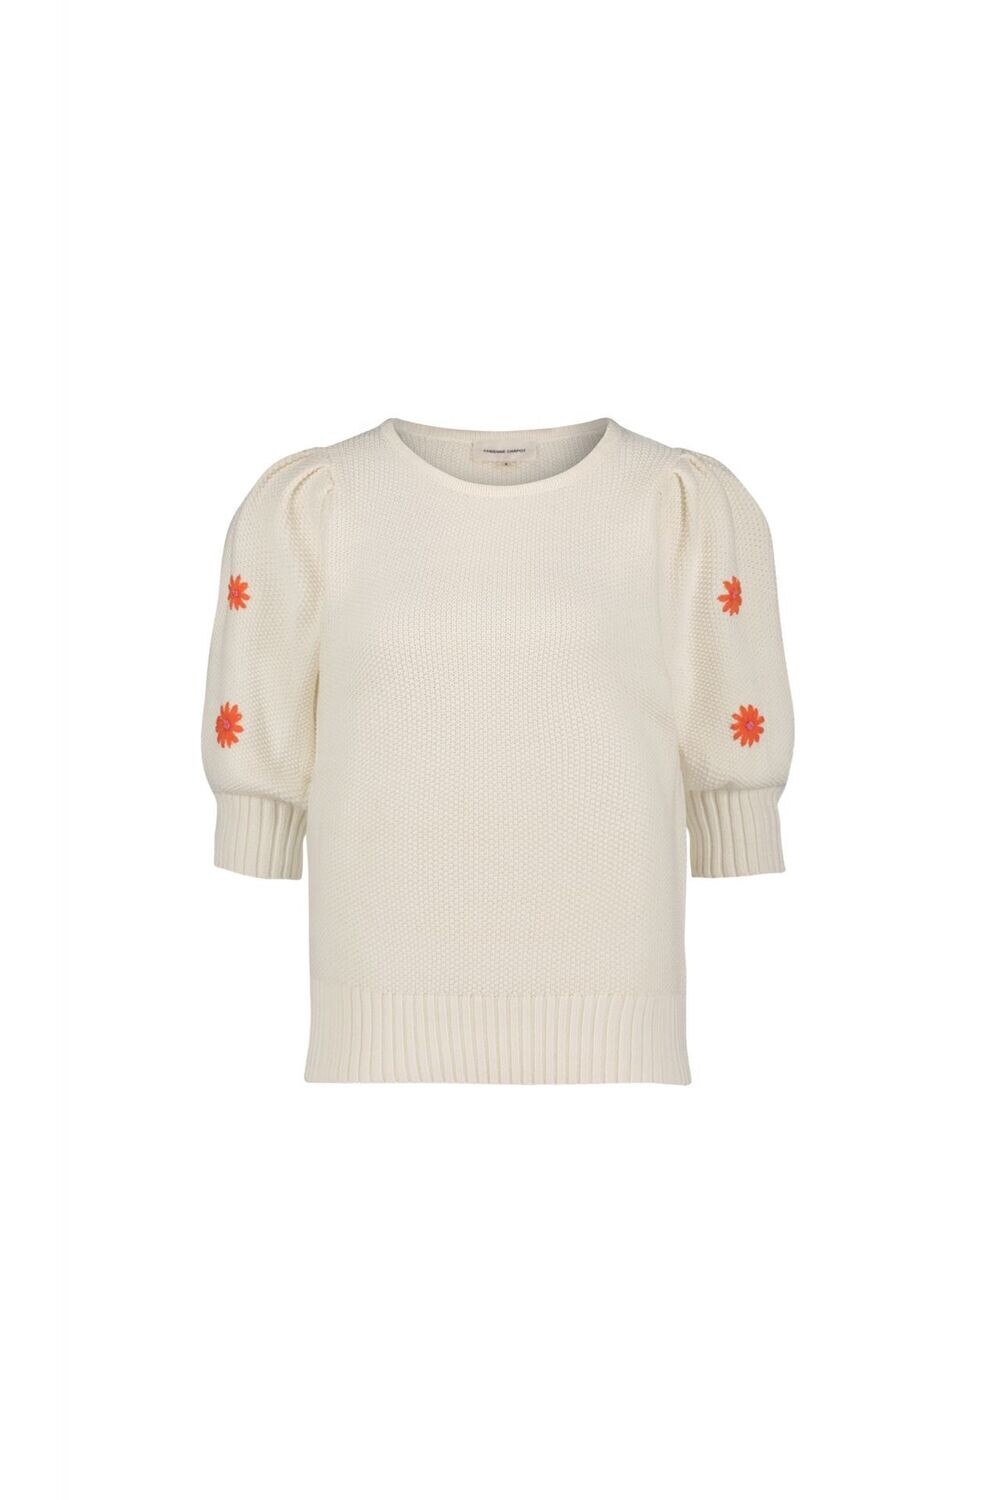 Fabienne Chapot Rice Short Sleeve Pullover in Cream White